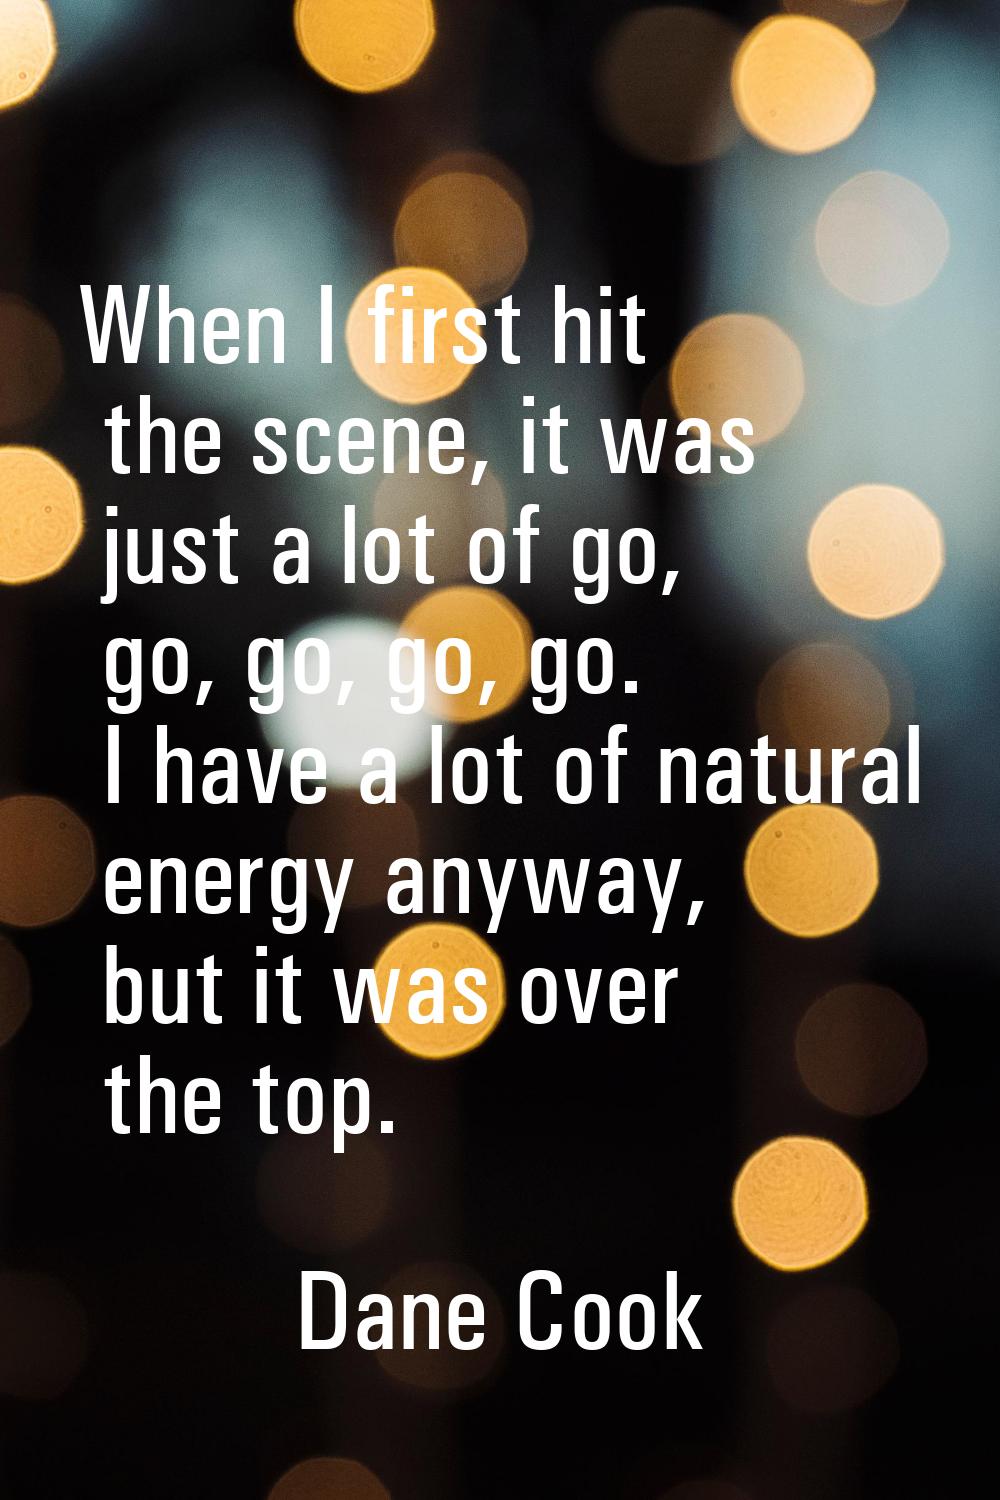 When I first hit the scene, it was just a lot of go, go, go, go, go. I have a lot of natural energy